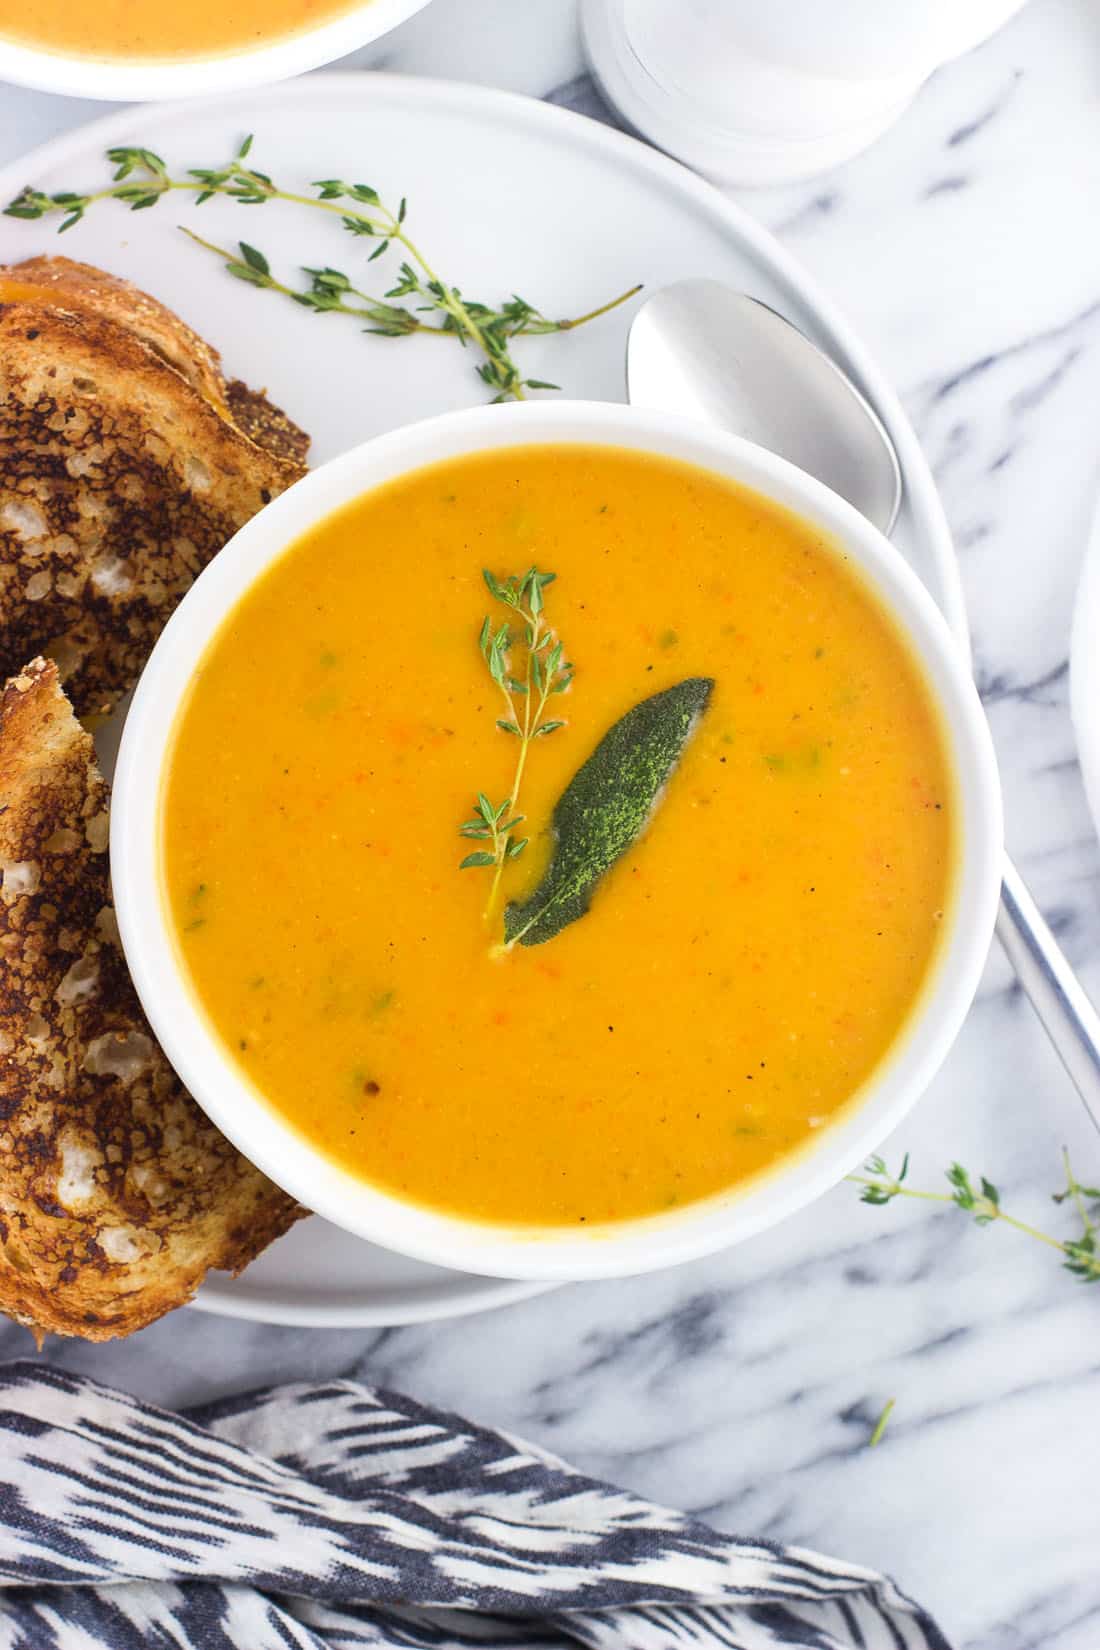 A bowl of butternut squash soup topped with herbs next to a grilled cheese sandwich.